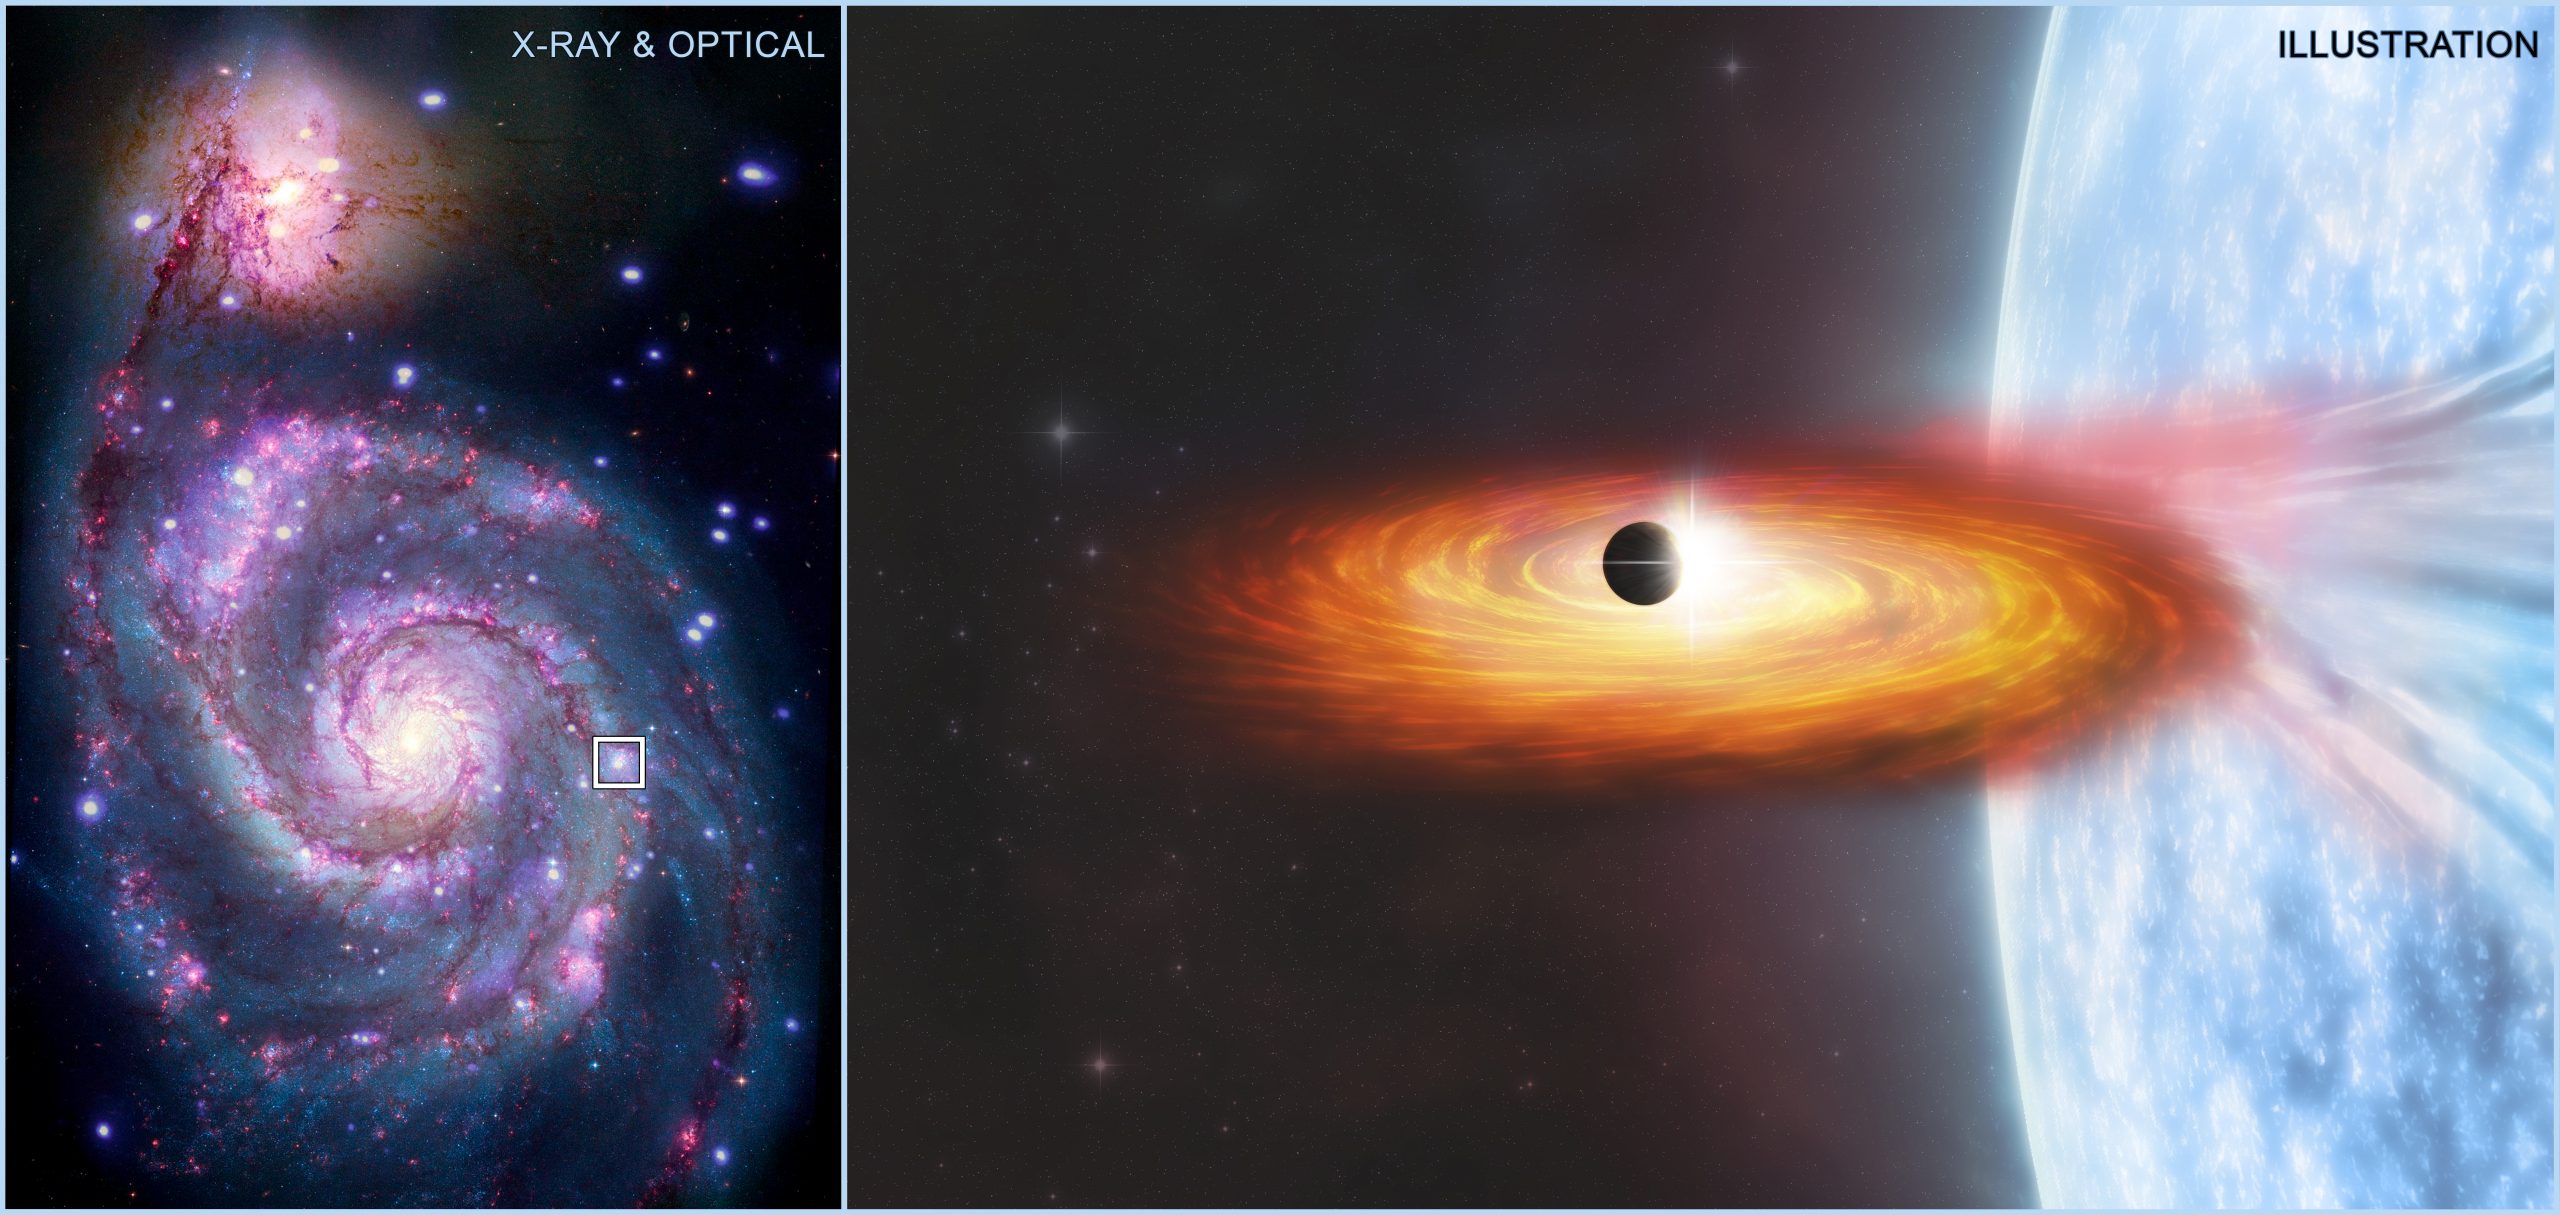 Location of the extragalactic planet and an artist's take on a X-ray binary with a possible planet. Credit: NASA/CXC/A. Hobart